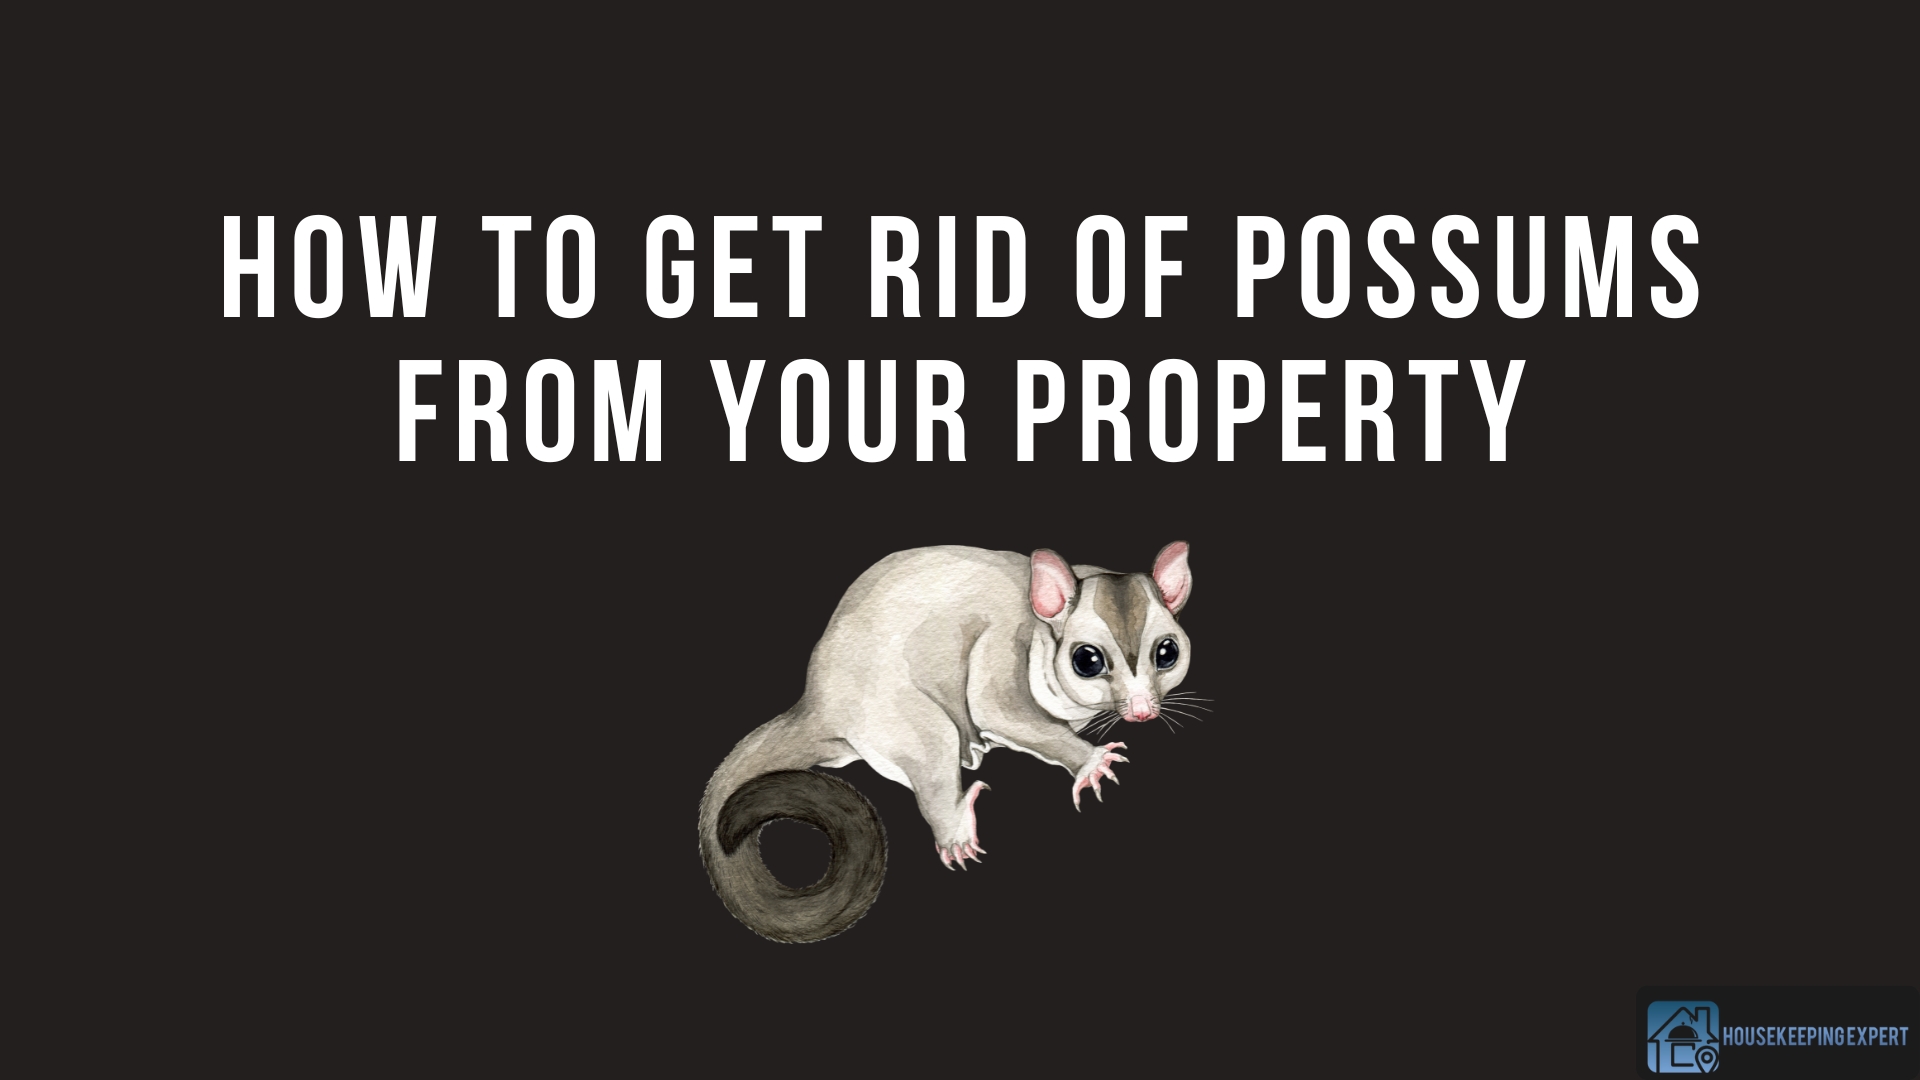 How to Get Rid of Possums from Your Property | 10 Ways